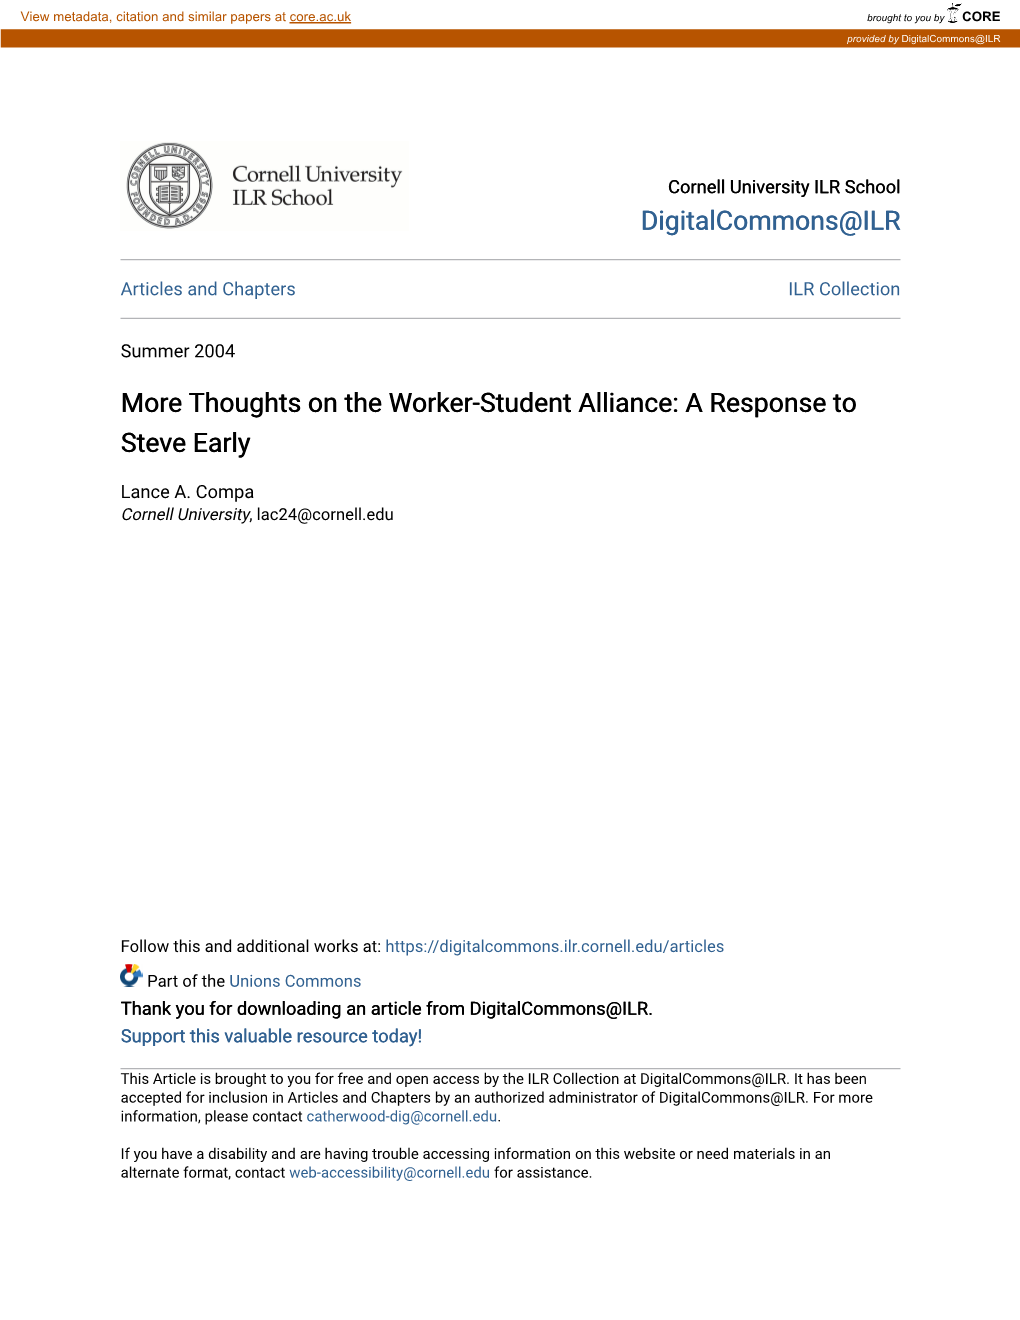 Thoughts on the Worker-Student Alliance: a Response to Steve Early